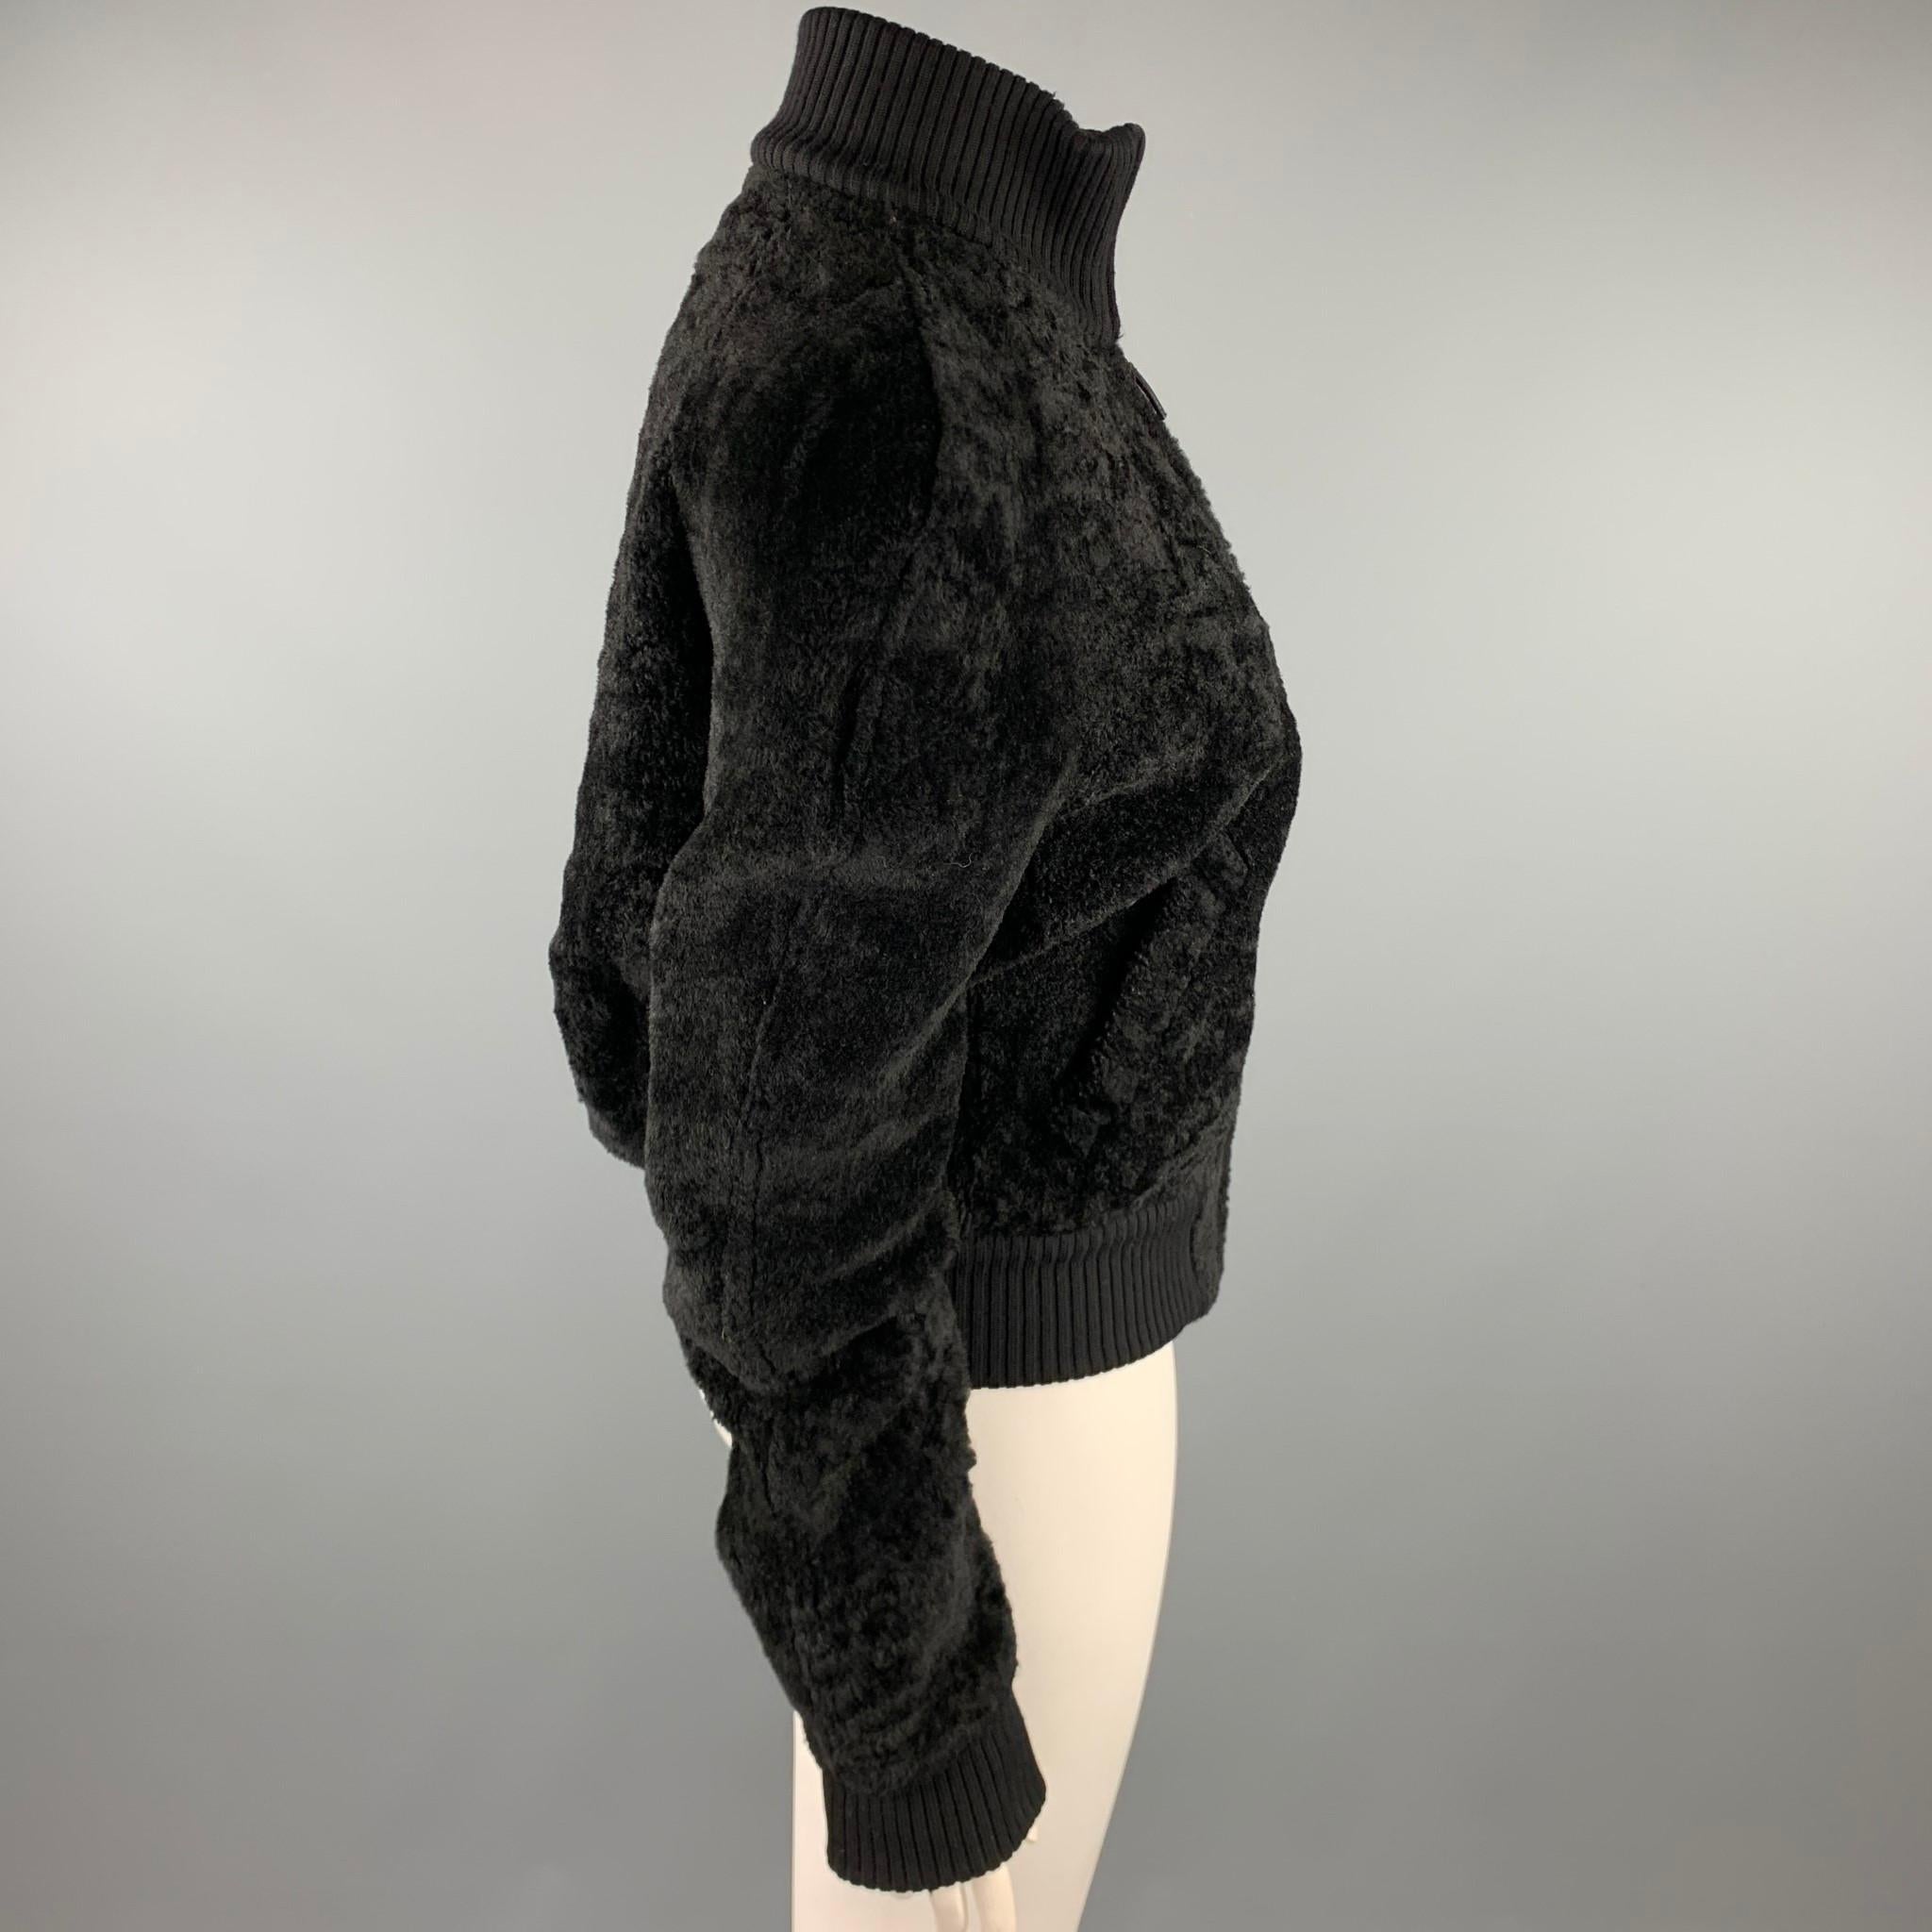 CALVIN KLEIN jacket comes in a black textured shearling leather featuring a high collar, ribbed trim, slit pockets, and a zip up closure. Made in Italy.

Very Good Pre-Owned Condition.
Marked: 8

Measurements:

Shoulder: 18 in. 
Bust: 42 in.